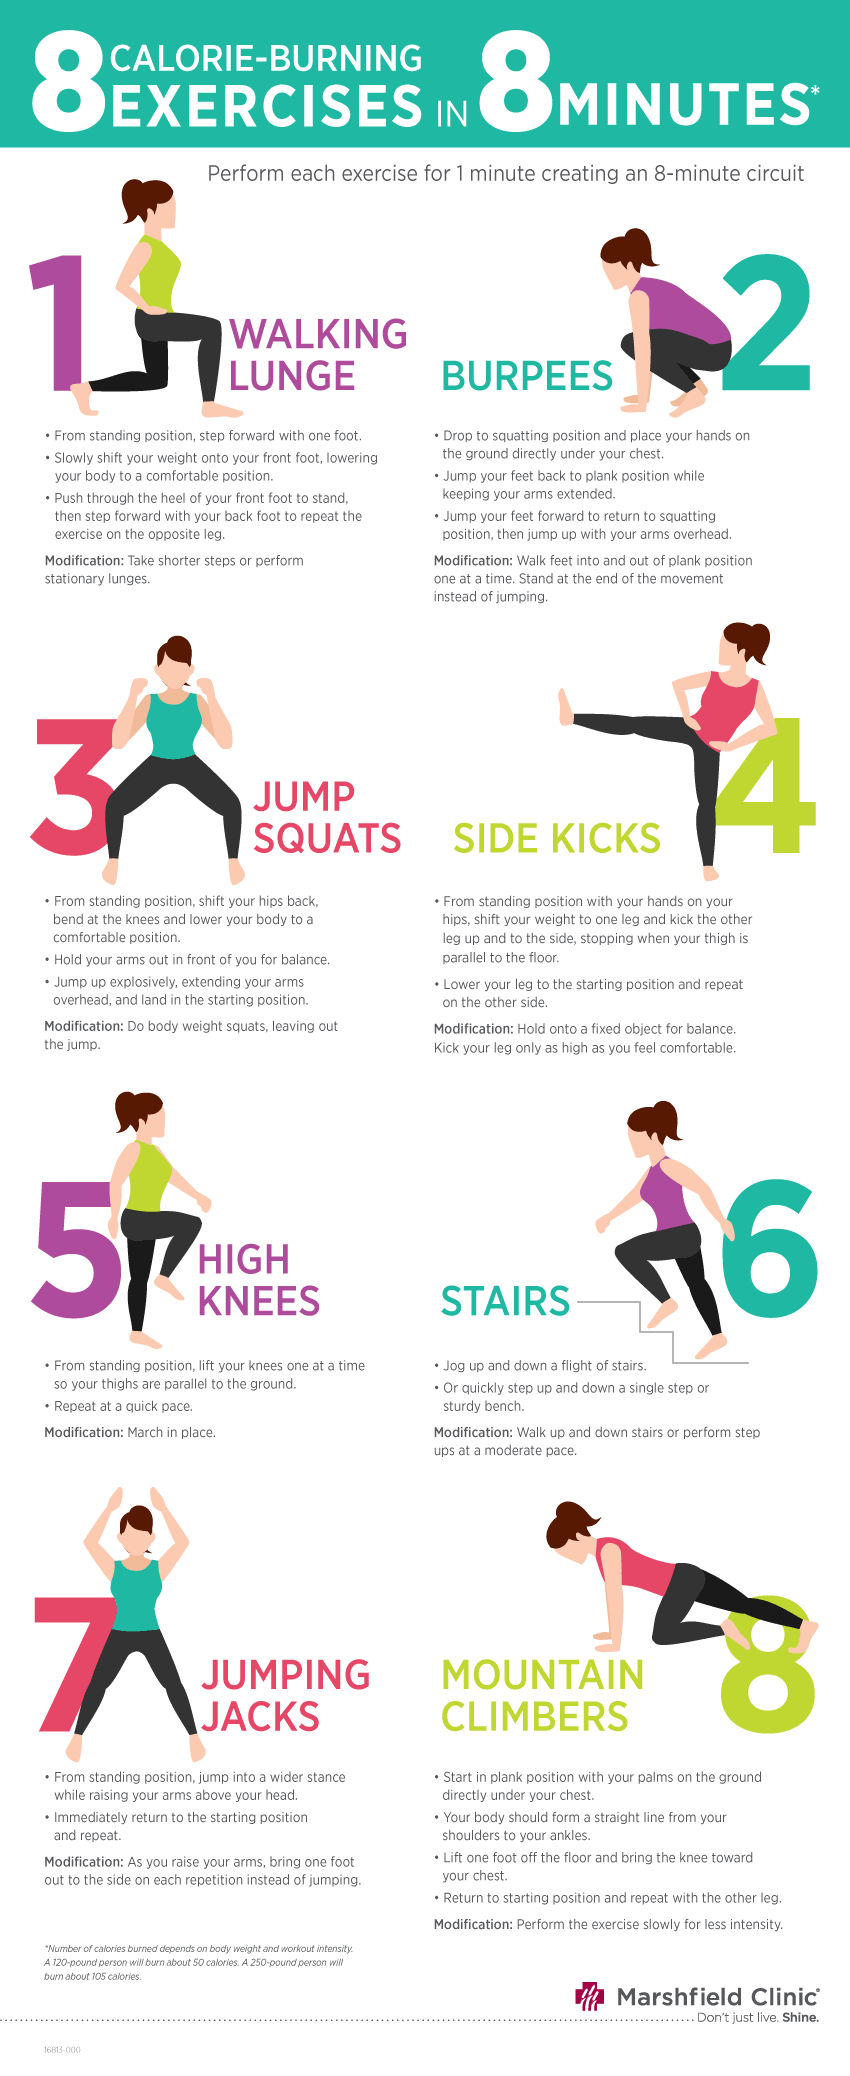 8 calorie burning exercises you can do in 8 minutes - illustration